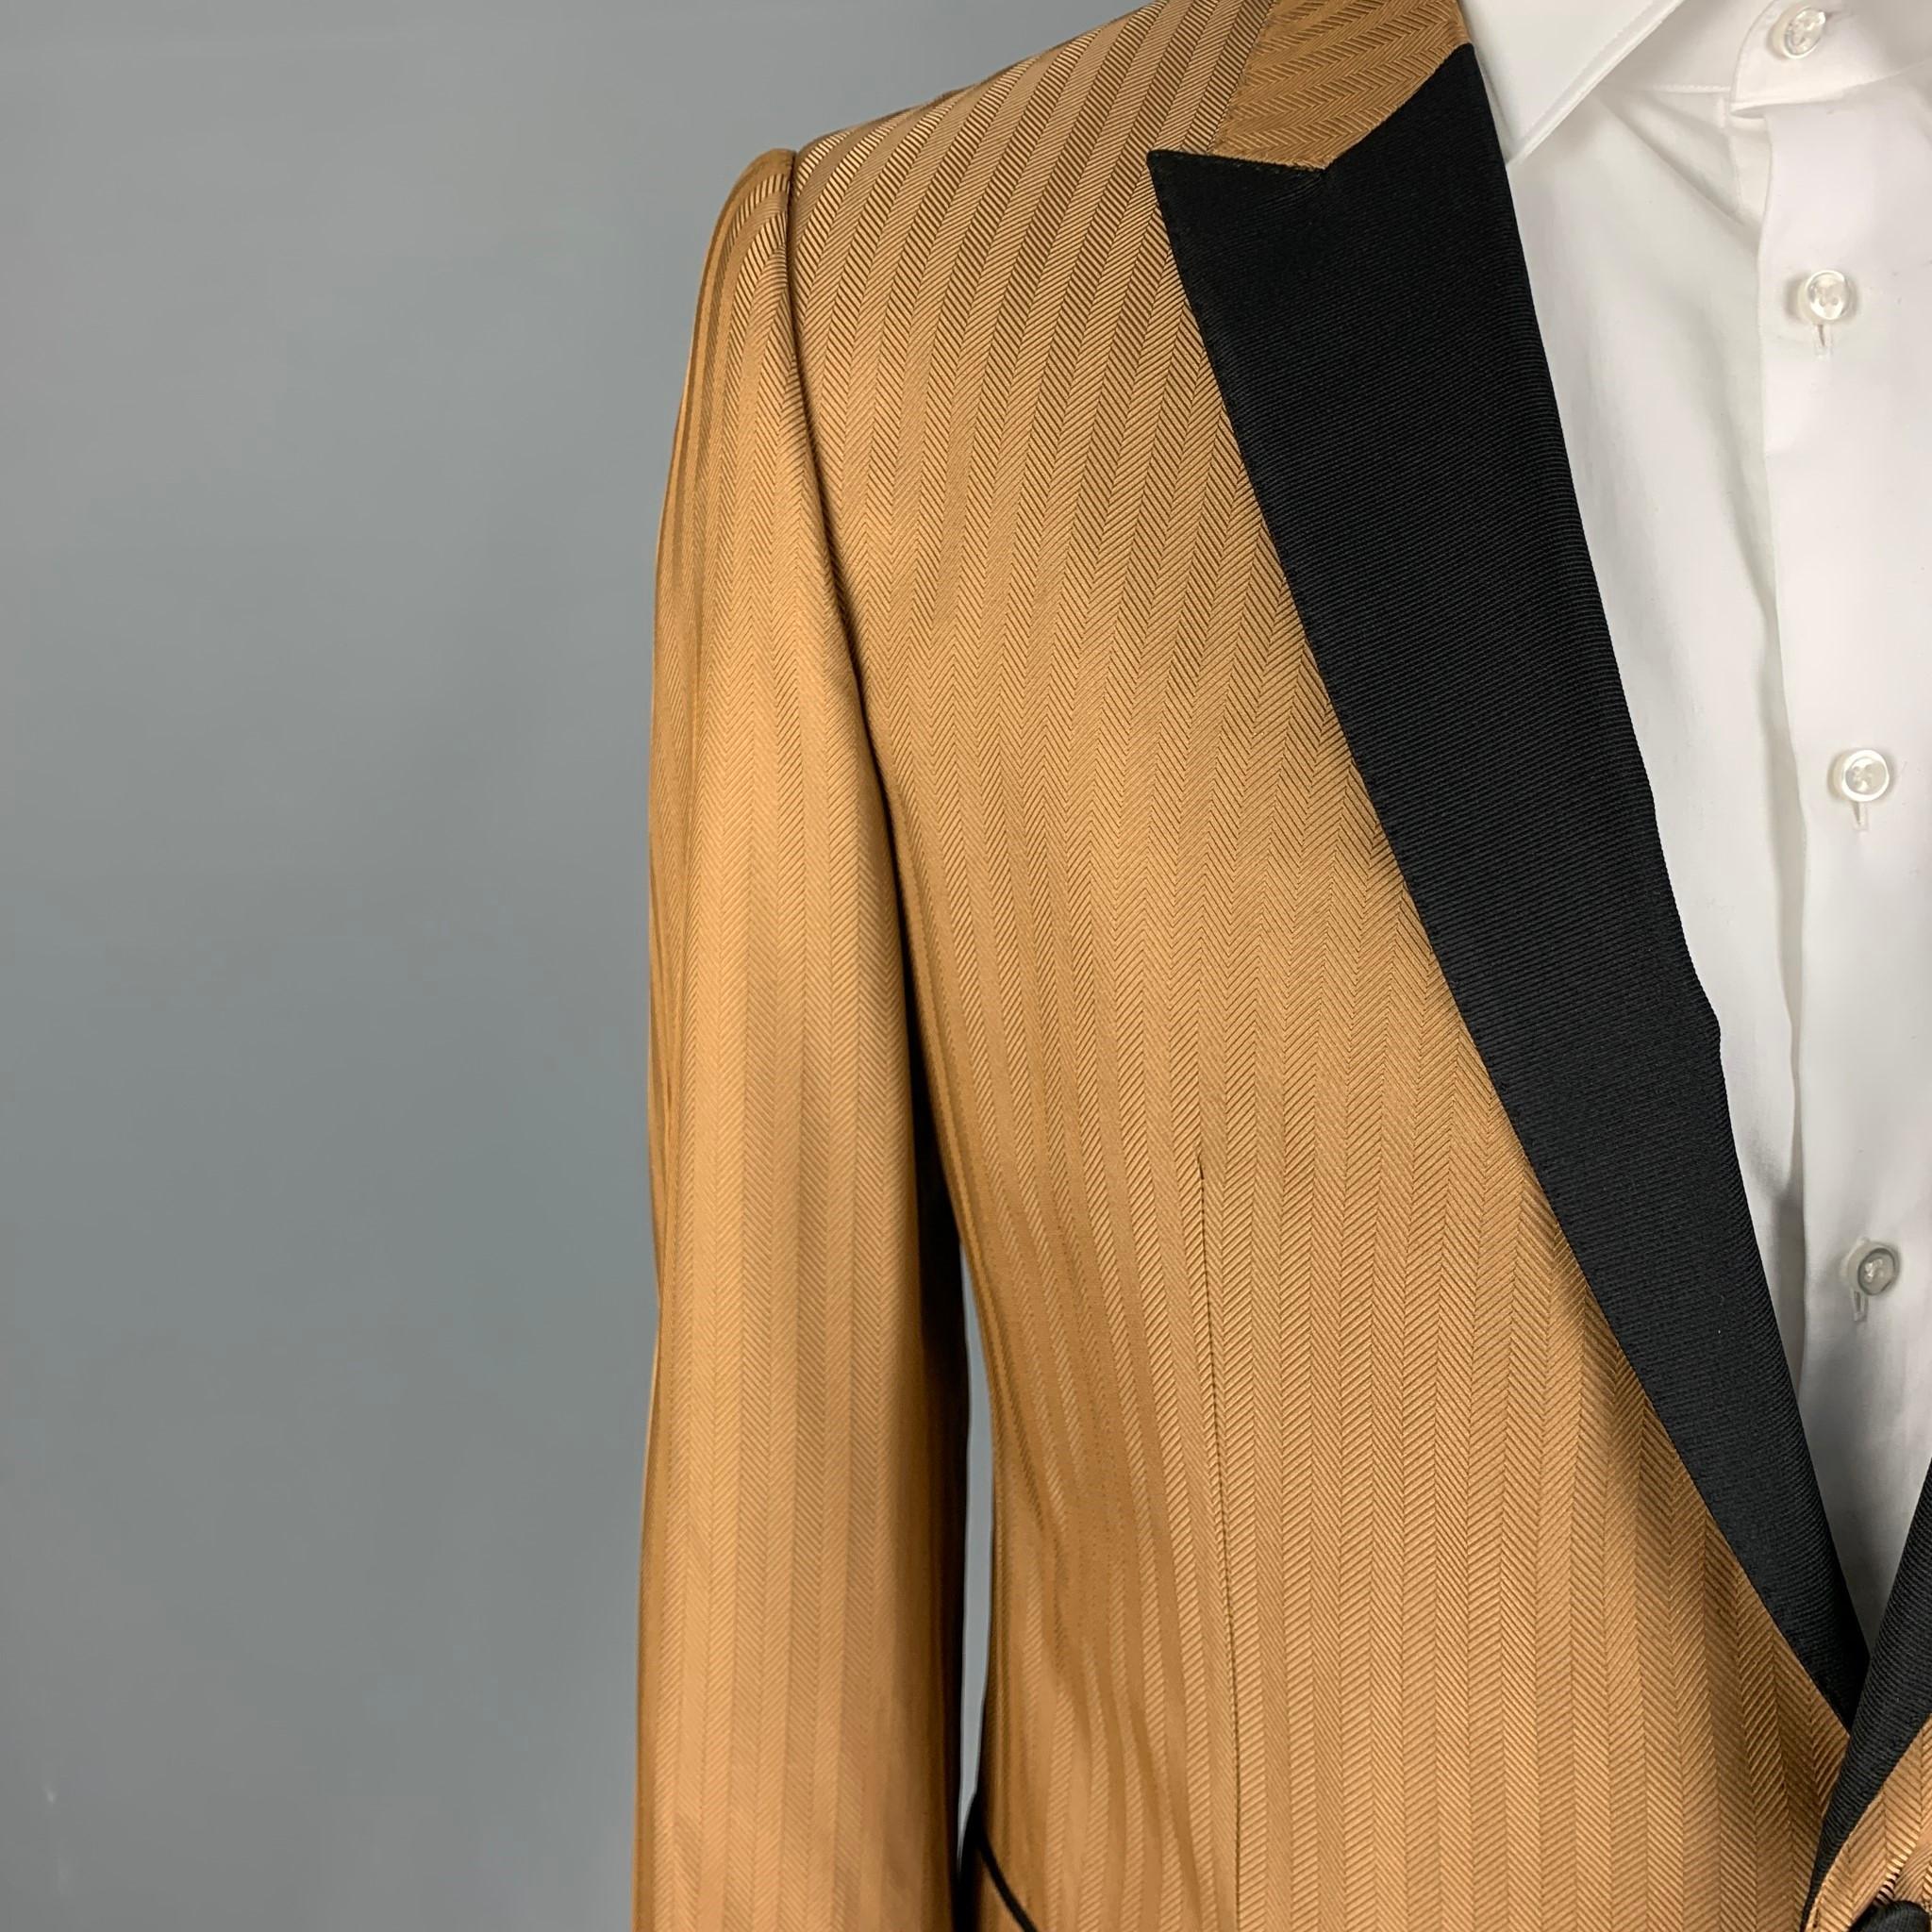 DOLCE & GABBANA sport coat comes in a tan herringbone silk blend with a full liner featuring a black peak lapel, flap pockets, single back vent, and a double button closure. Made in Italy. 

Excellent Pre-Owned Condition.
Marked: